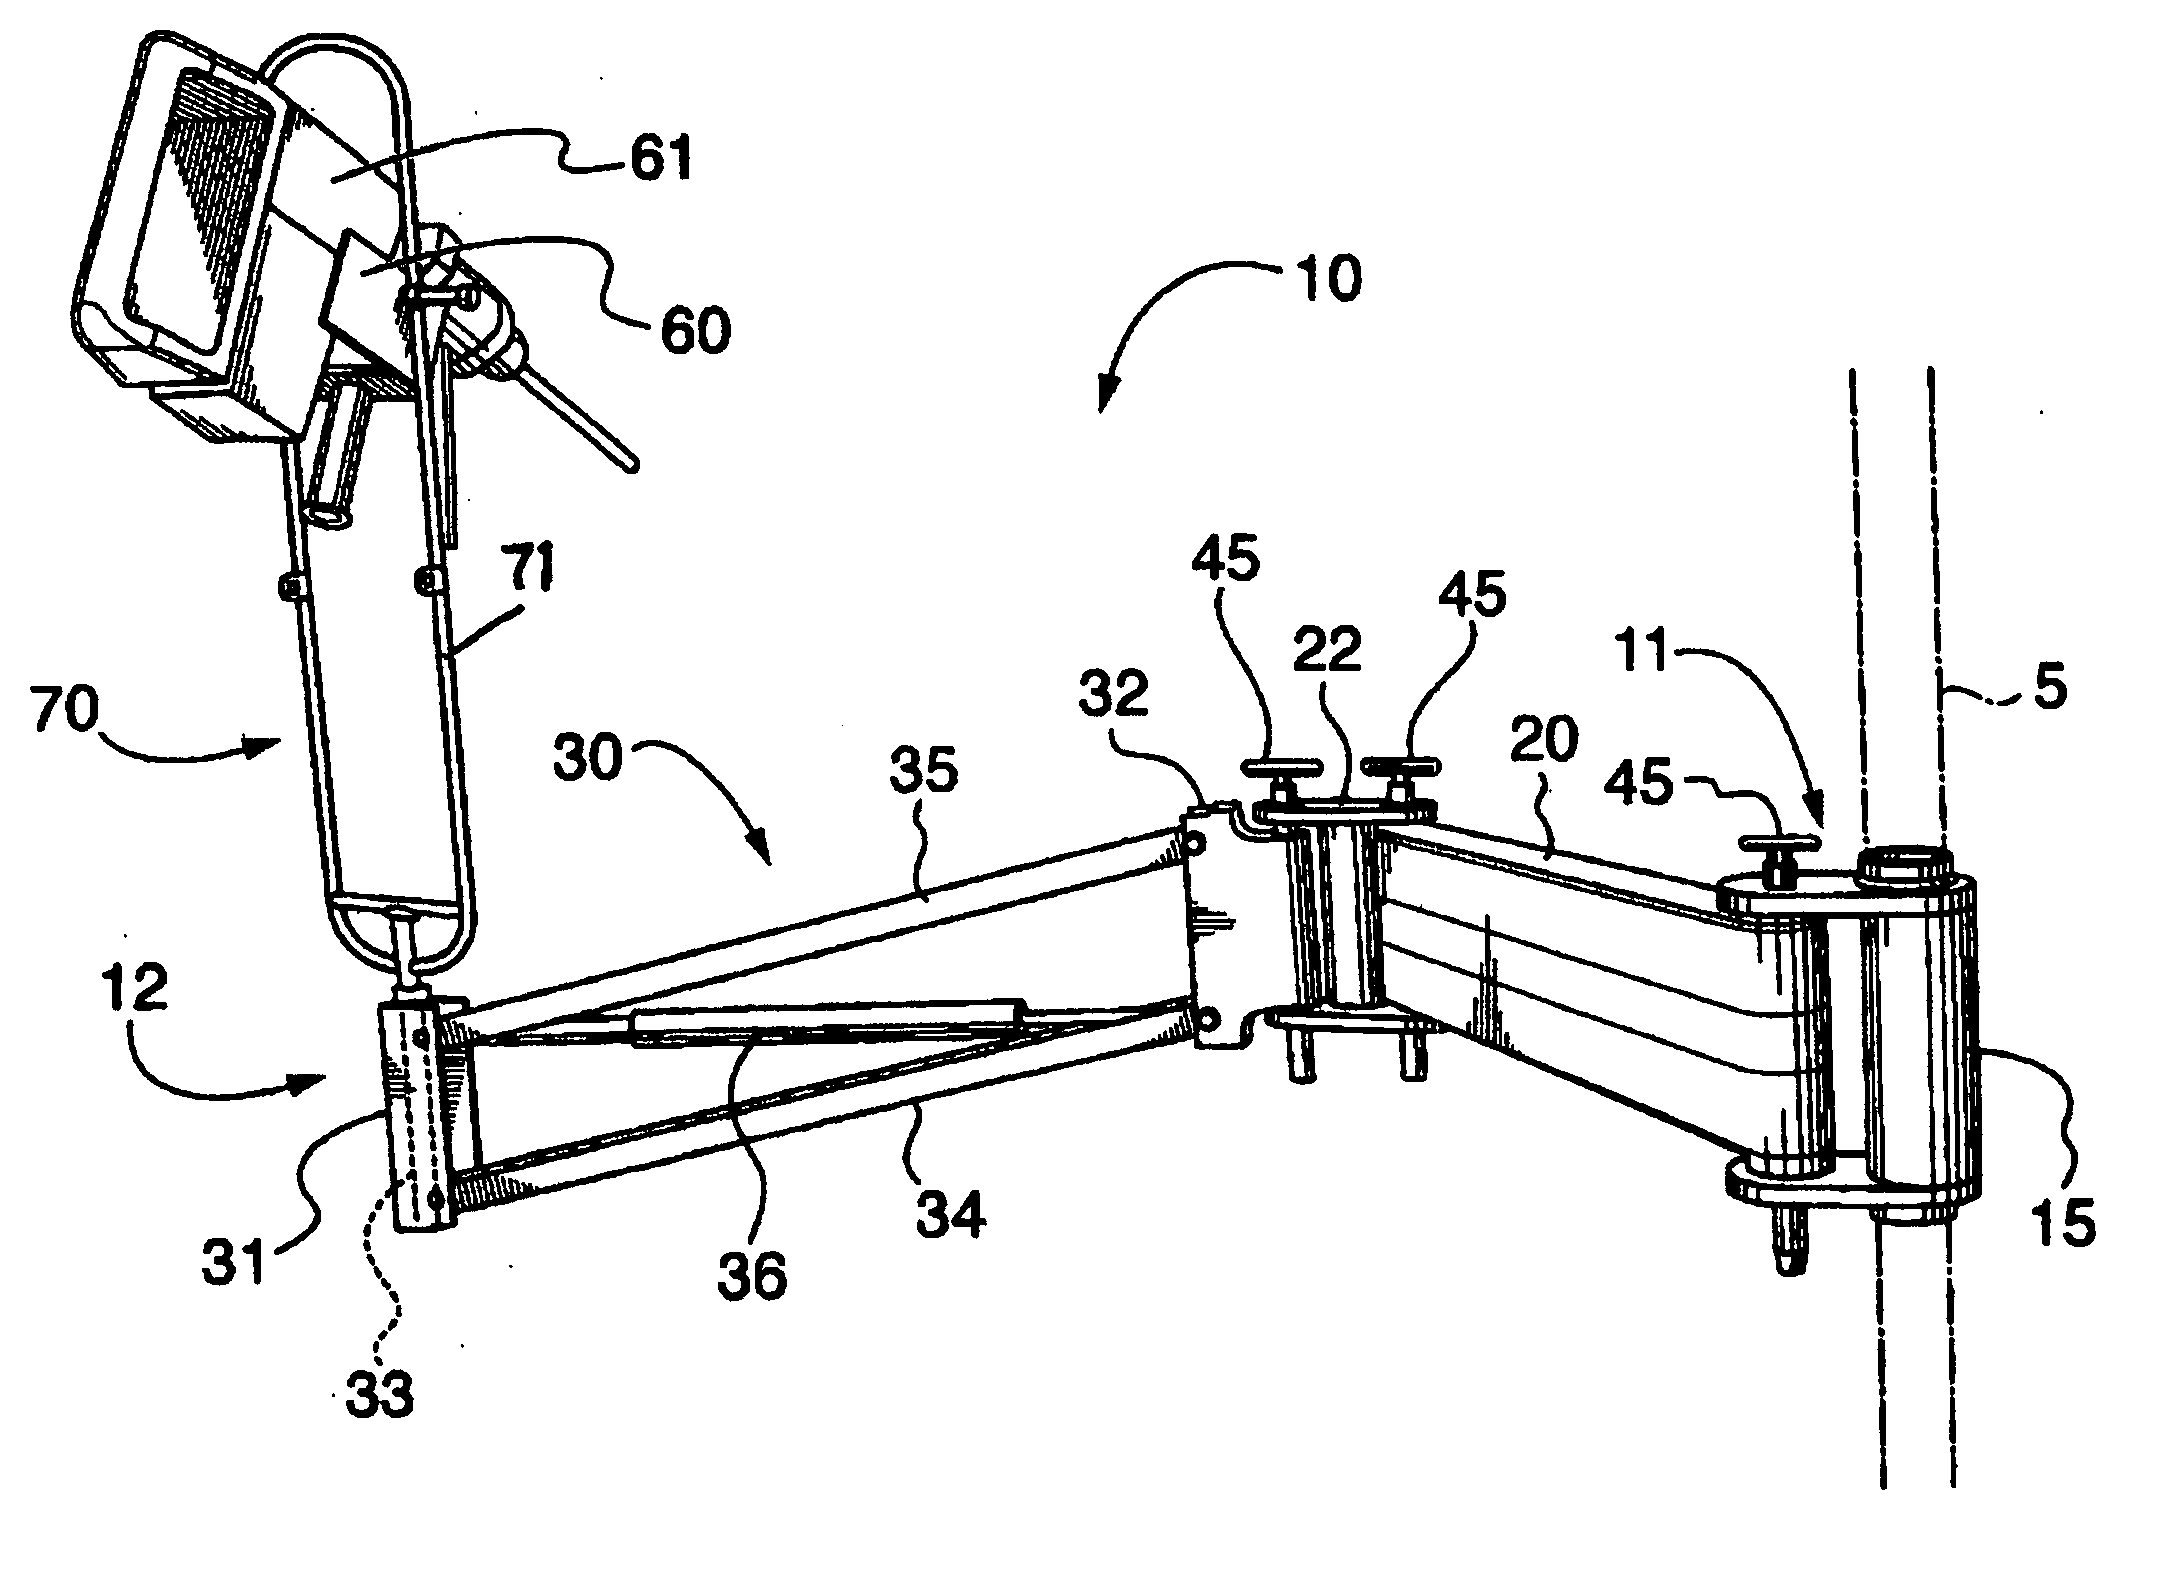 Portable articulating tool support